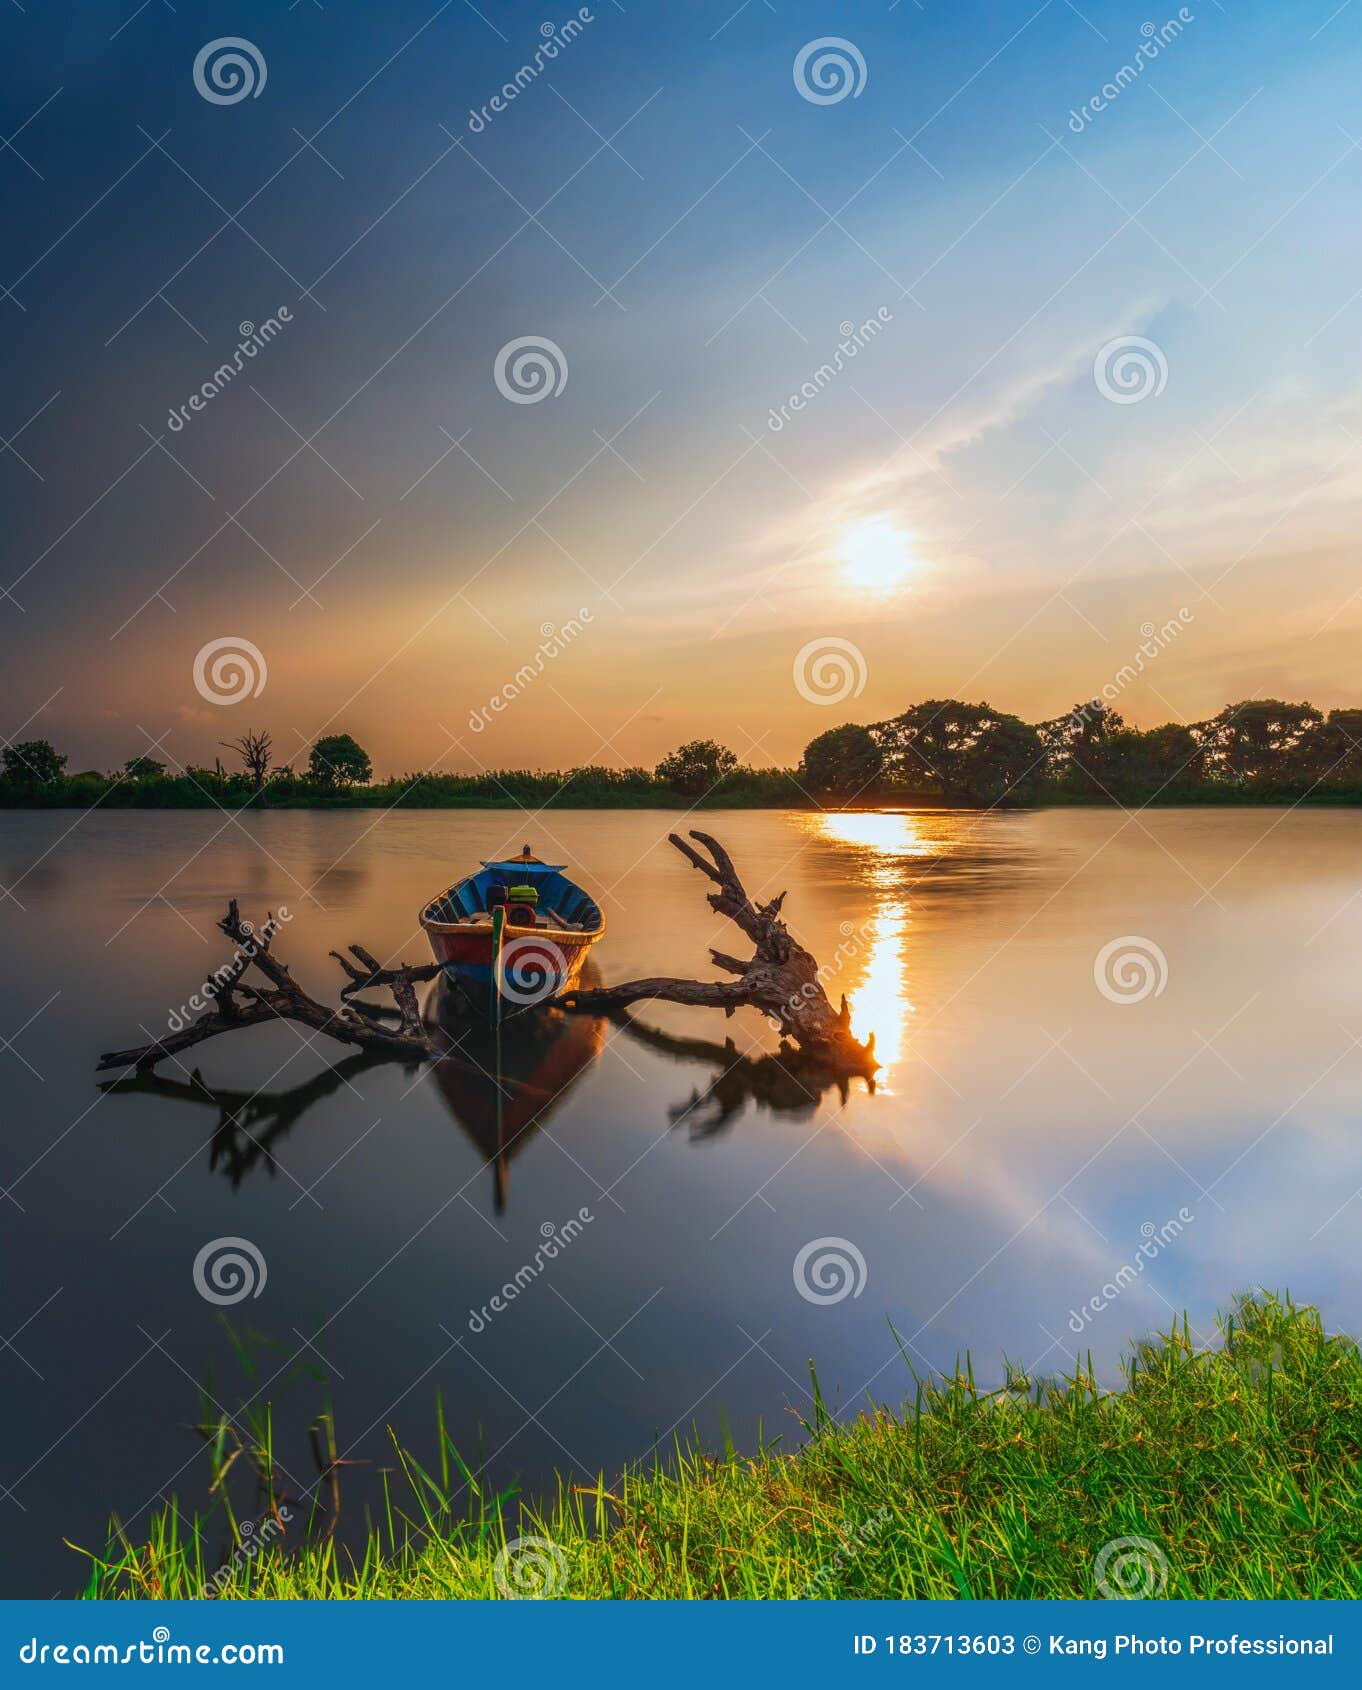 beautiful sunset and traditional beautiful little fishing boat with fantastic golden sky and nature